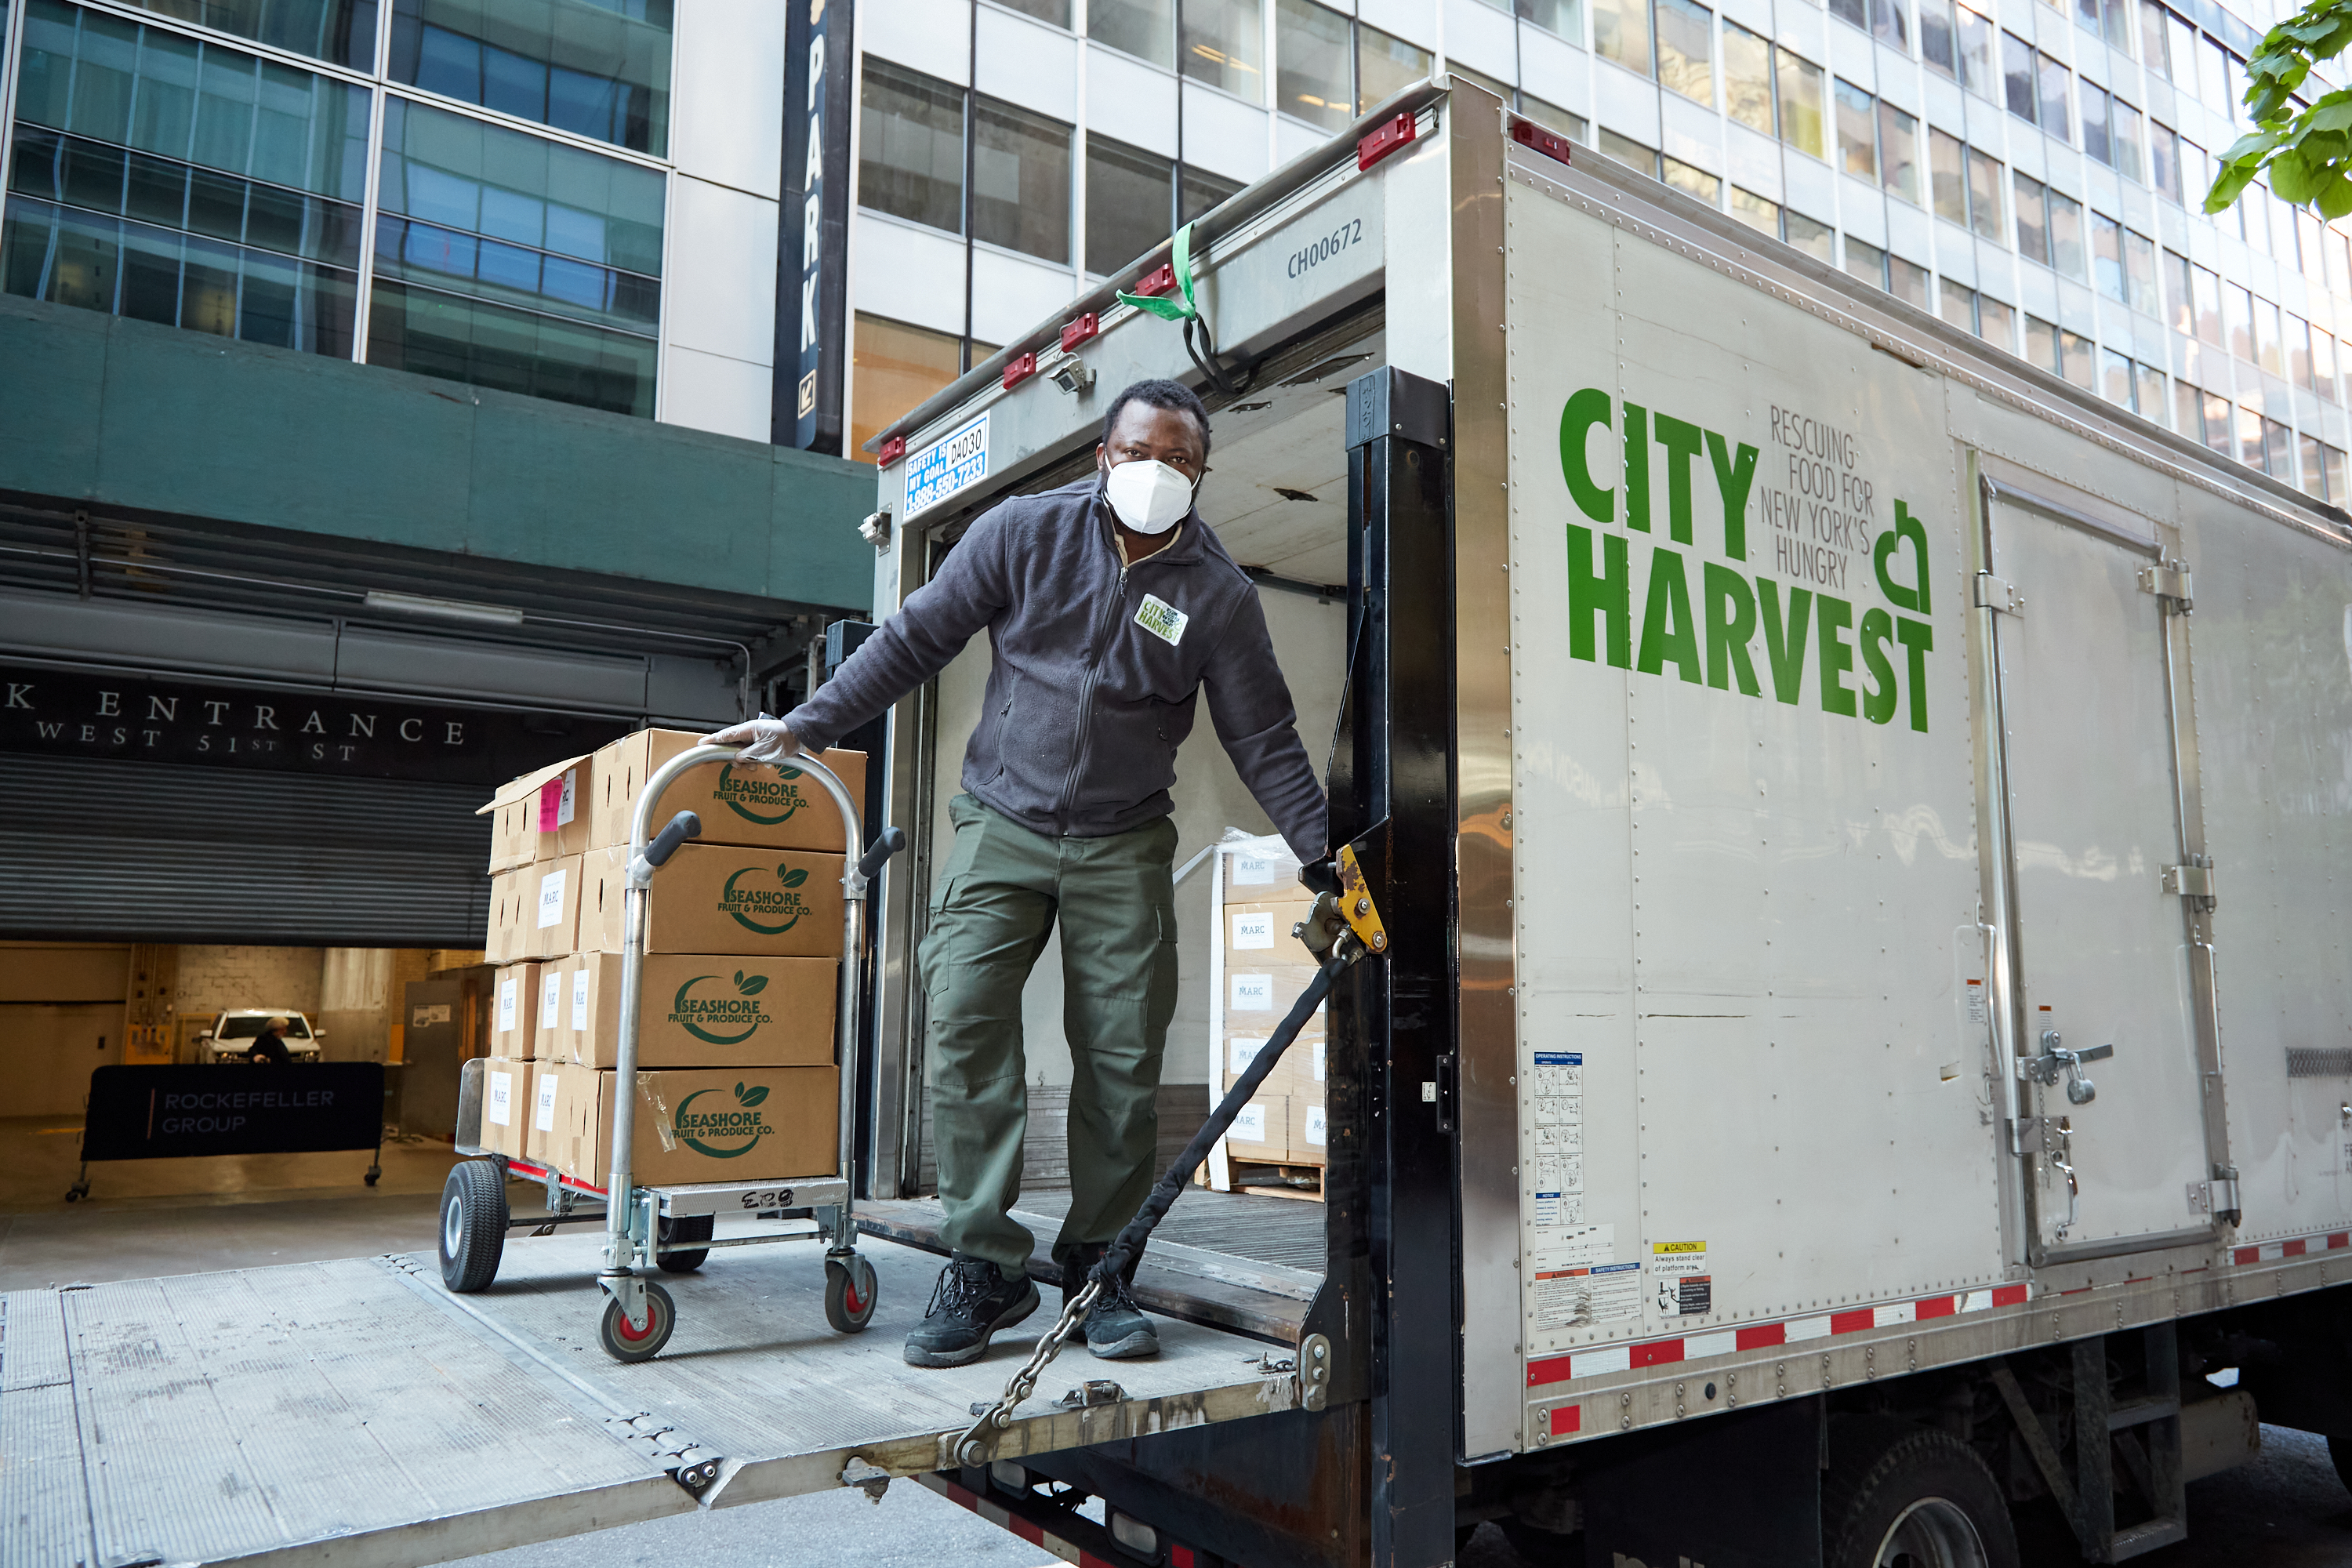 A man unloads boxes from a City Harvest truck